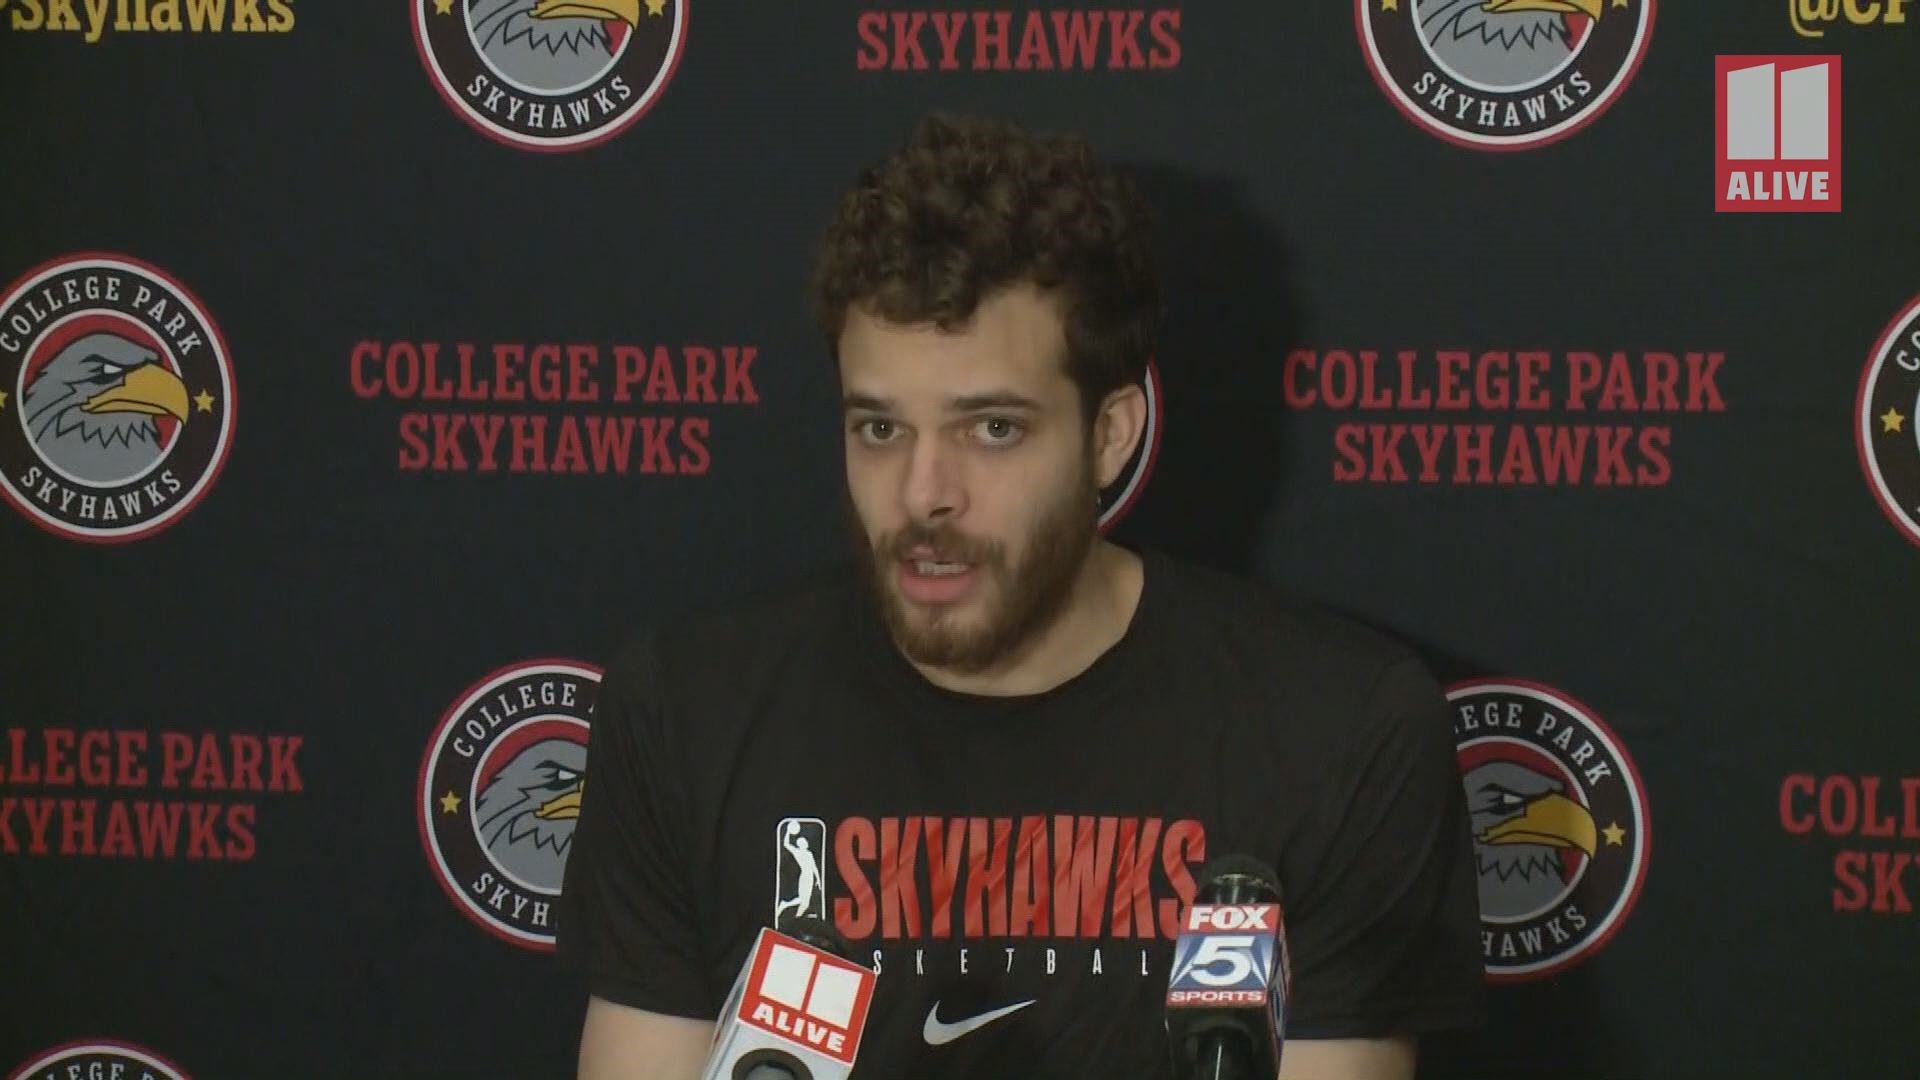 The former Georgia State basketball star is joining the Atlanta Hawks' affiliate team, the College Park Skyhawks.